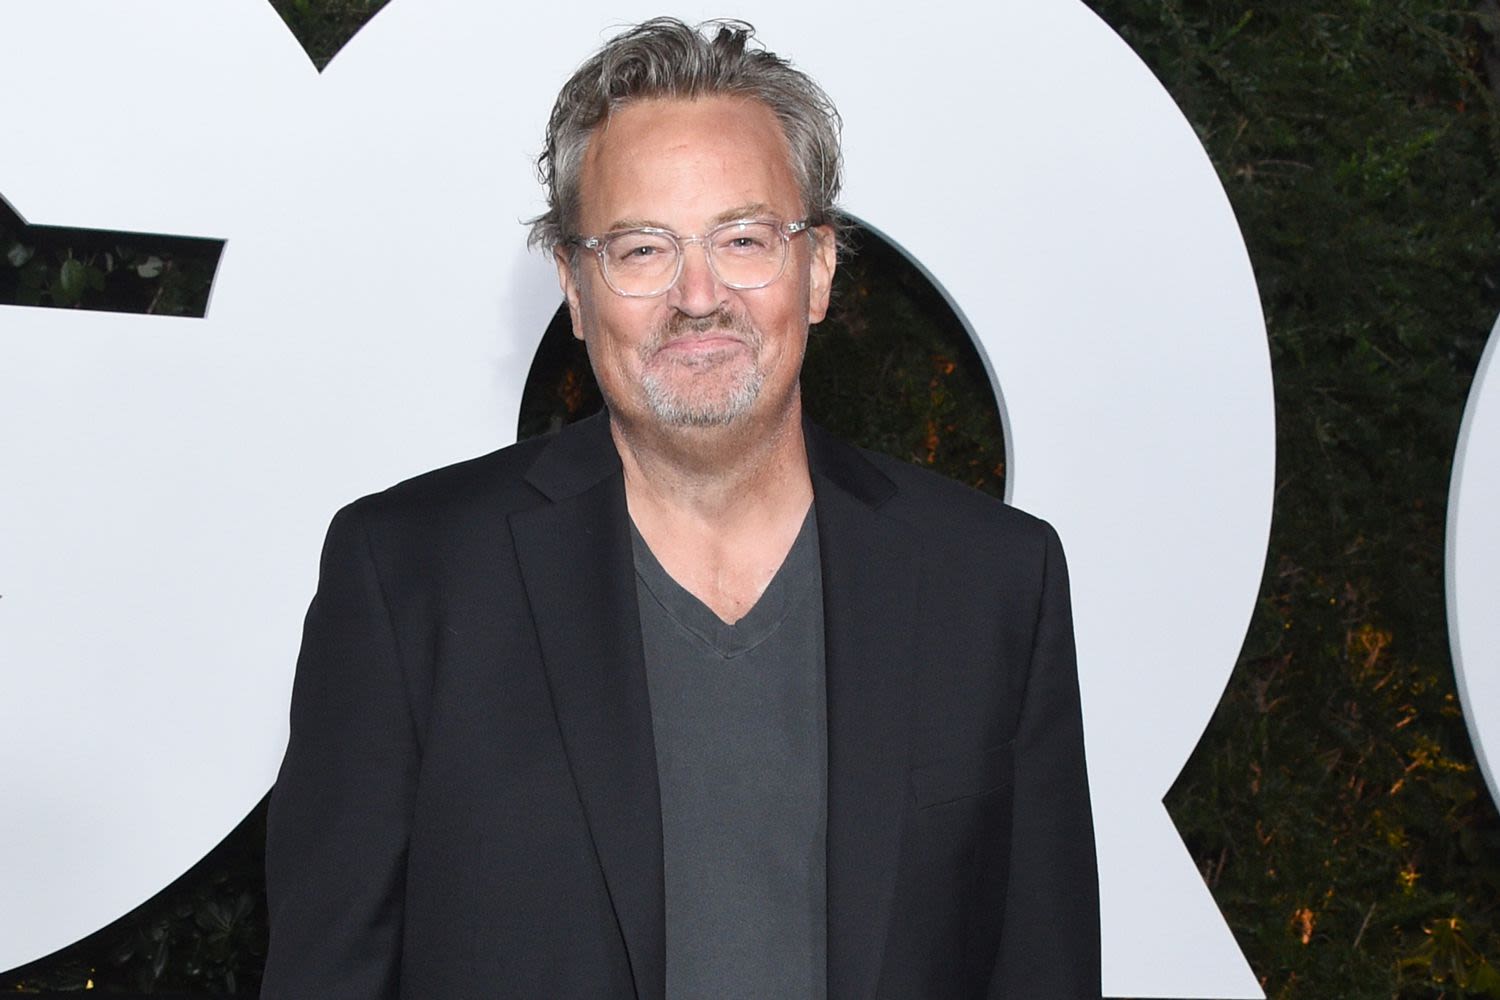 Matthew Perry Had More Than $1.5 Million in His Personal Bank Account at the Time of His Death